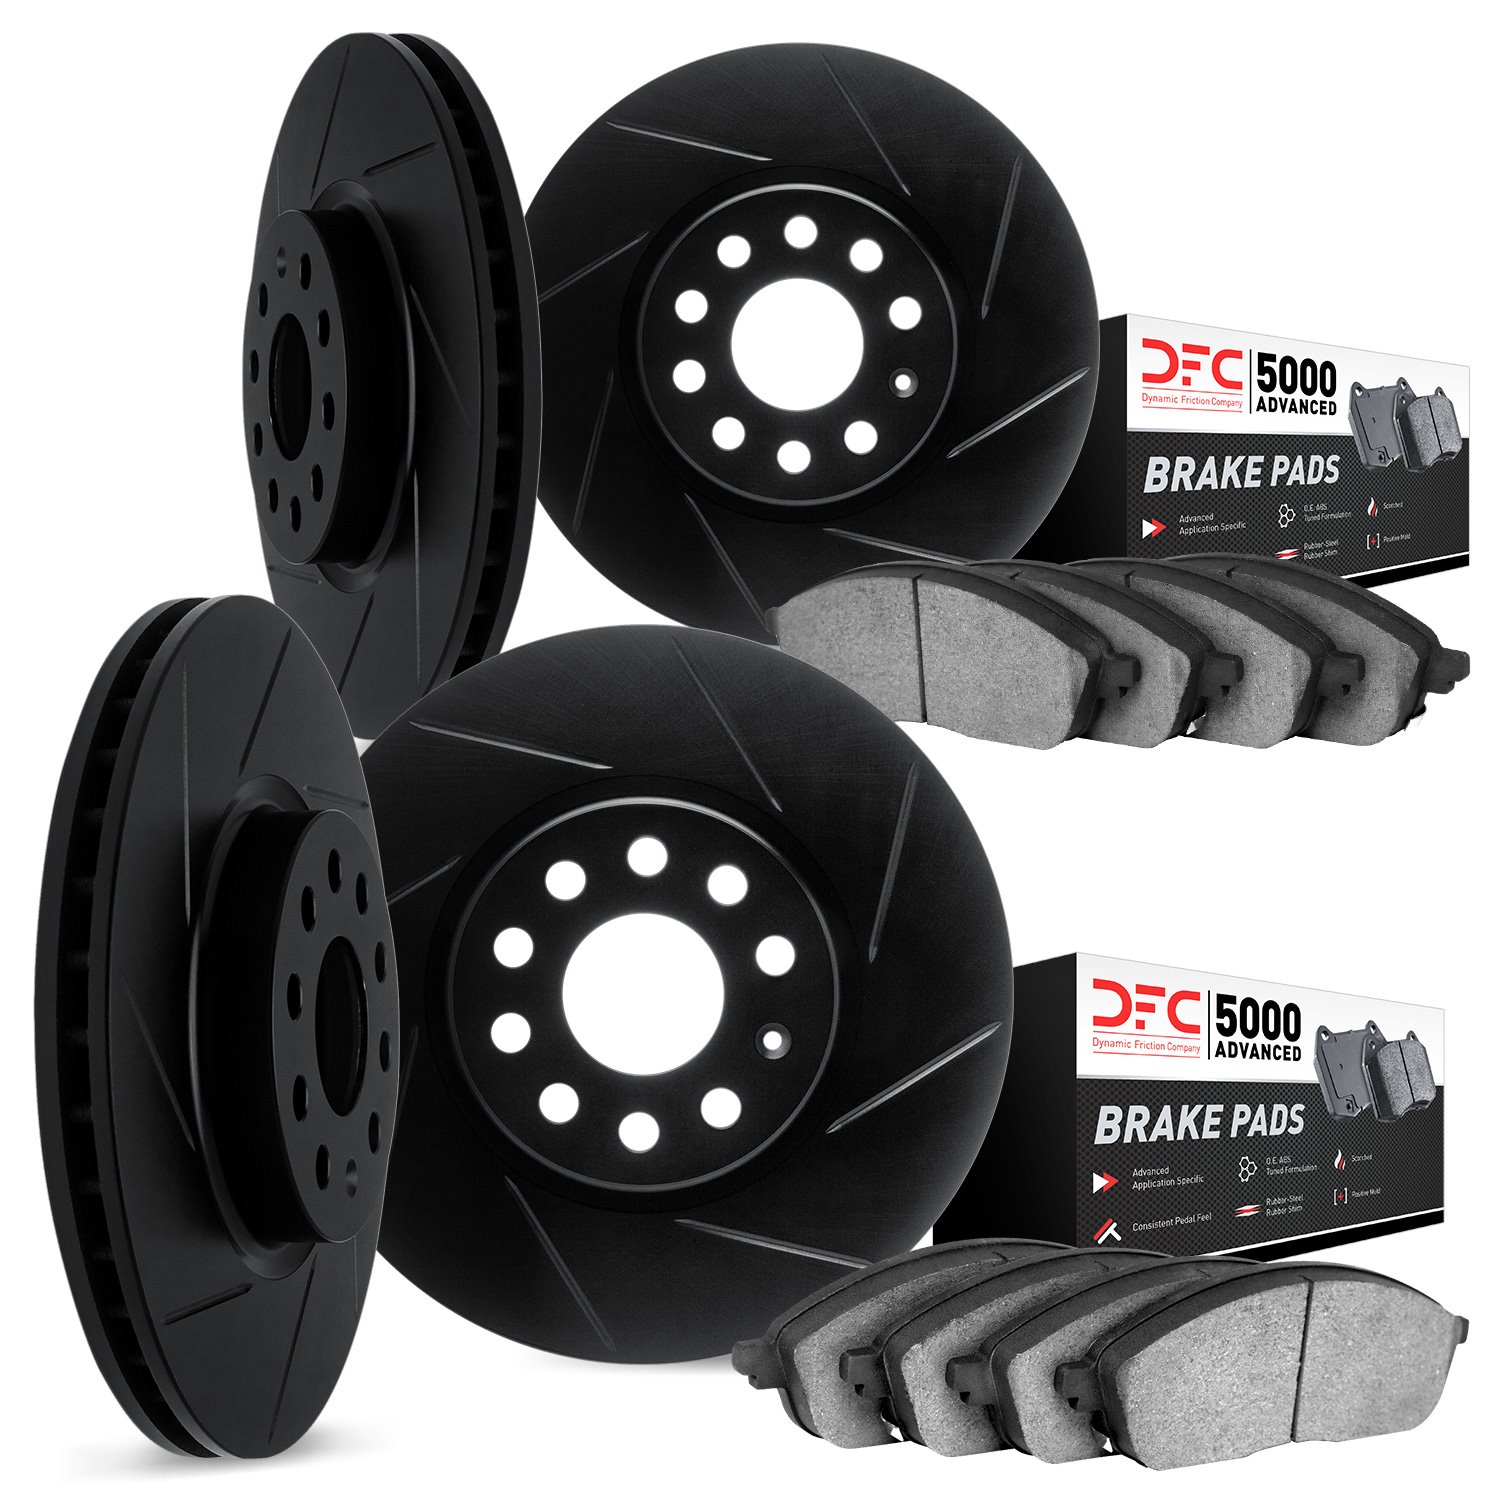 3514-31086 Slotted Brake Rotors w/5000 Advanced Brake Pads Kit & Hardware [Black], 2015-2018 BMW, Position: Front and Rear